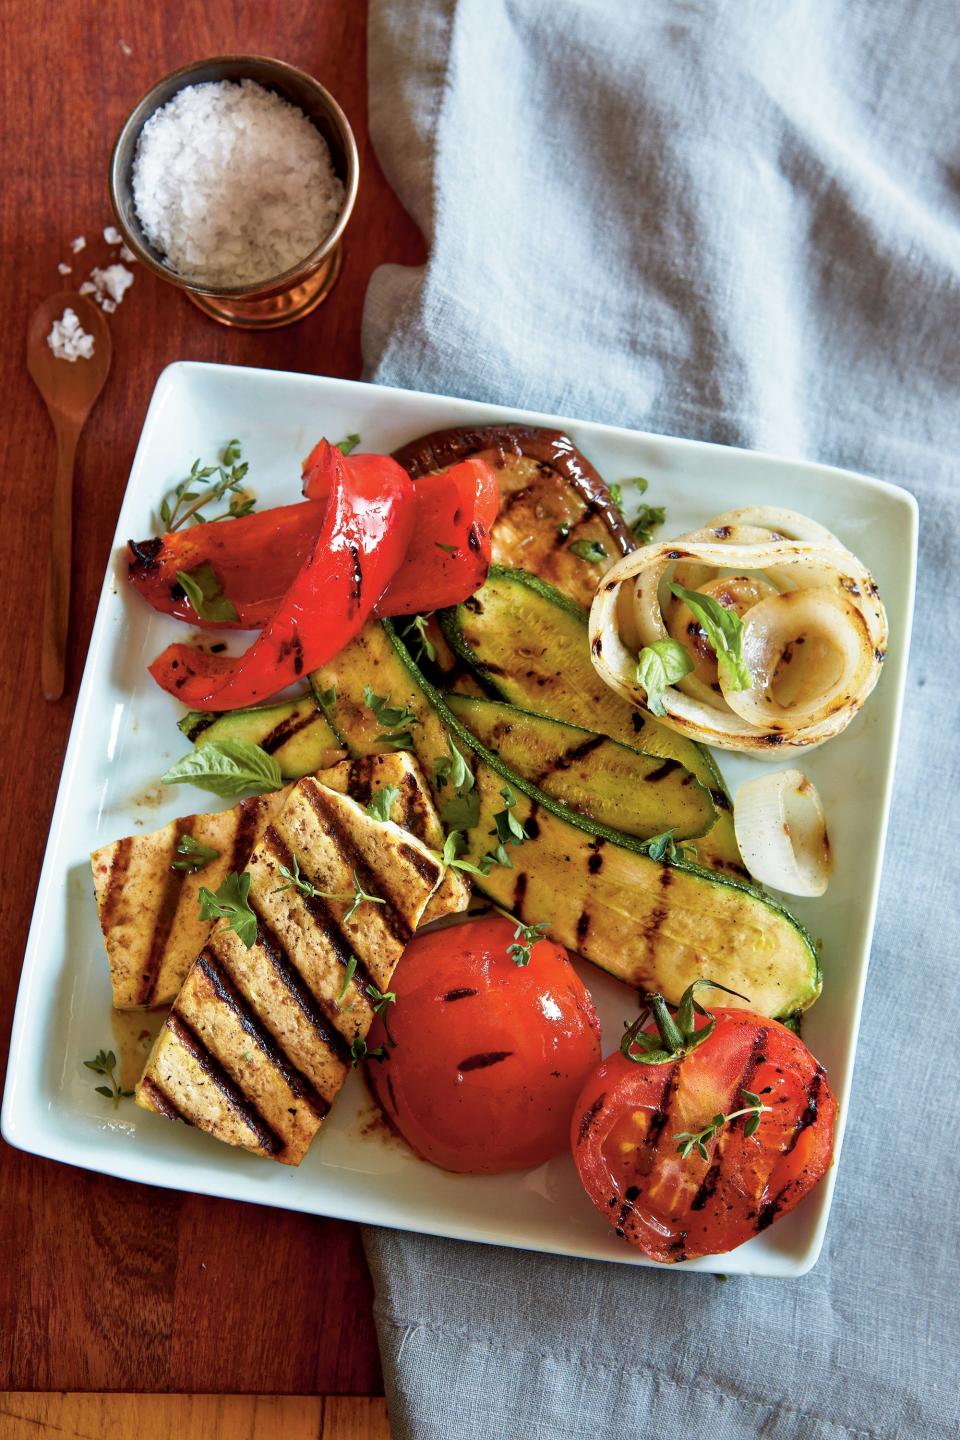 Grilled Tofu With Ratatouille Vegetables